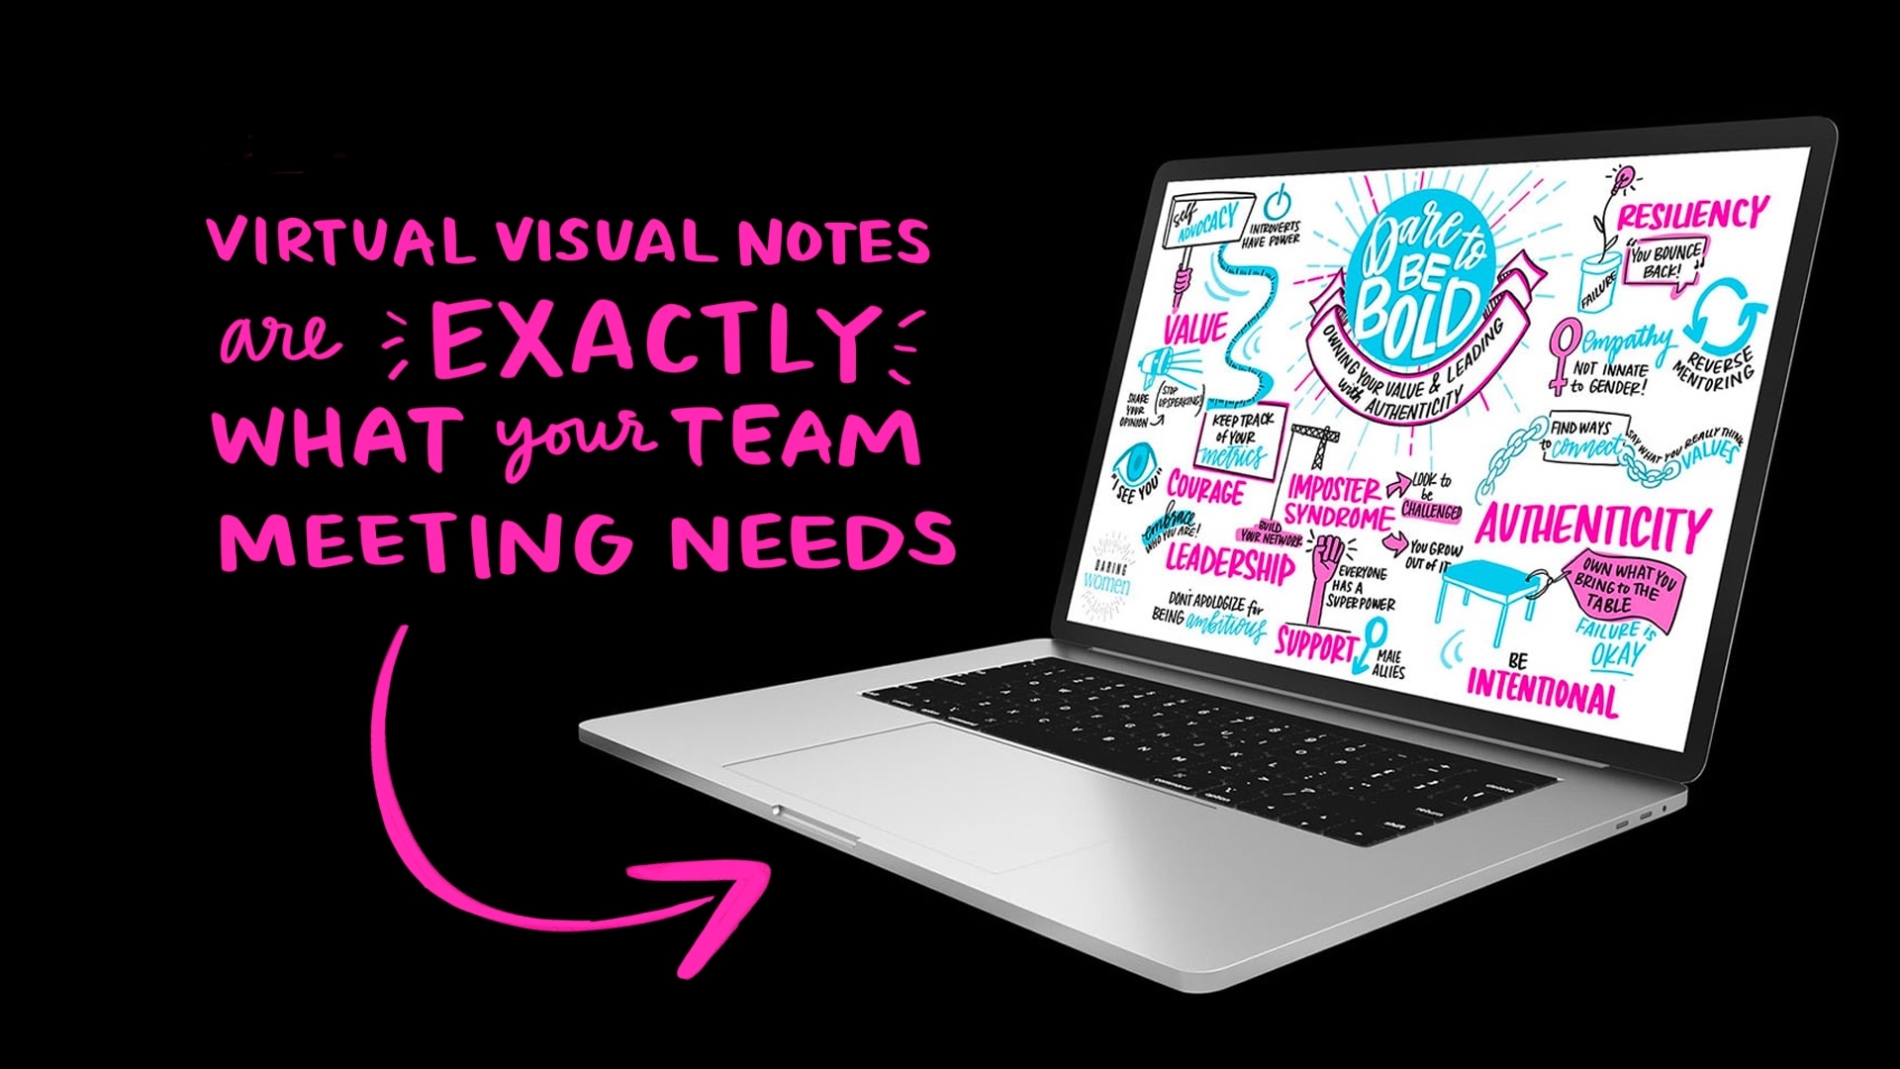 How to Make Team Meetings More Engaging with Virtual Visual Notes